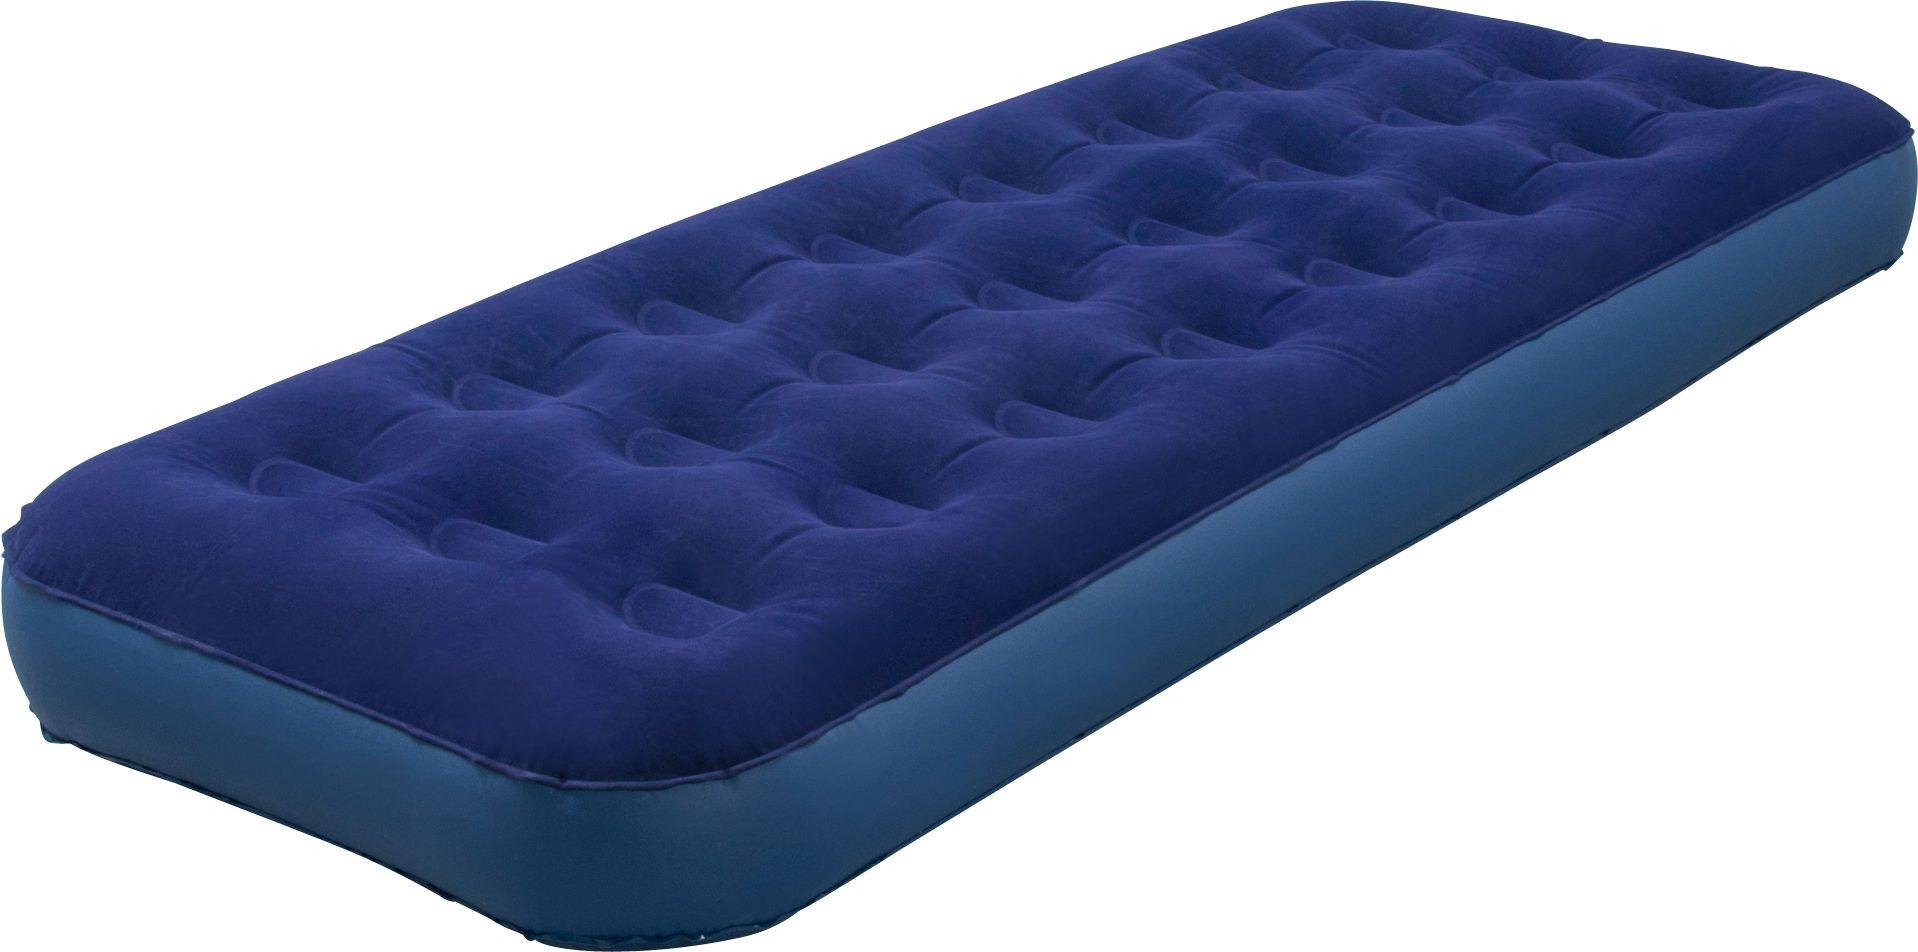 Lichfield Single Deluxe Camping Air Bed with Pump